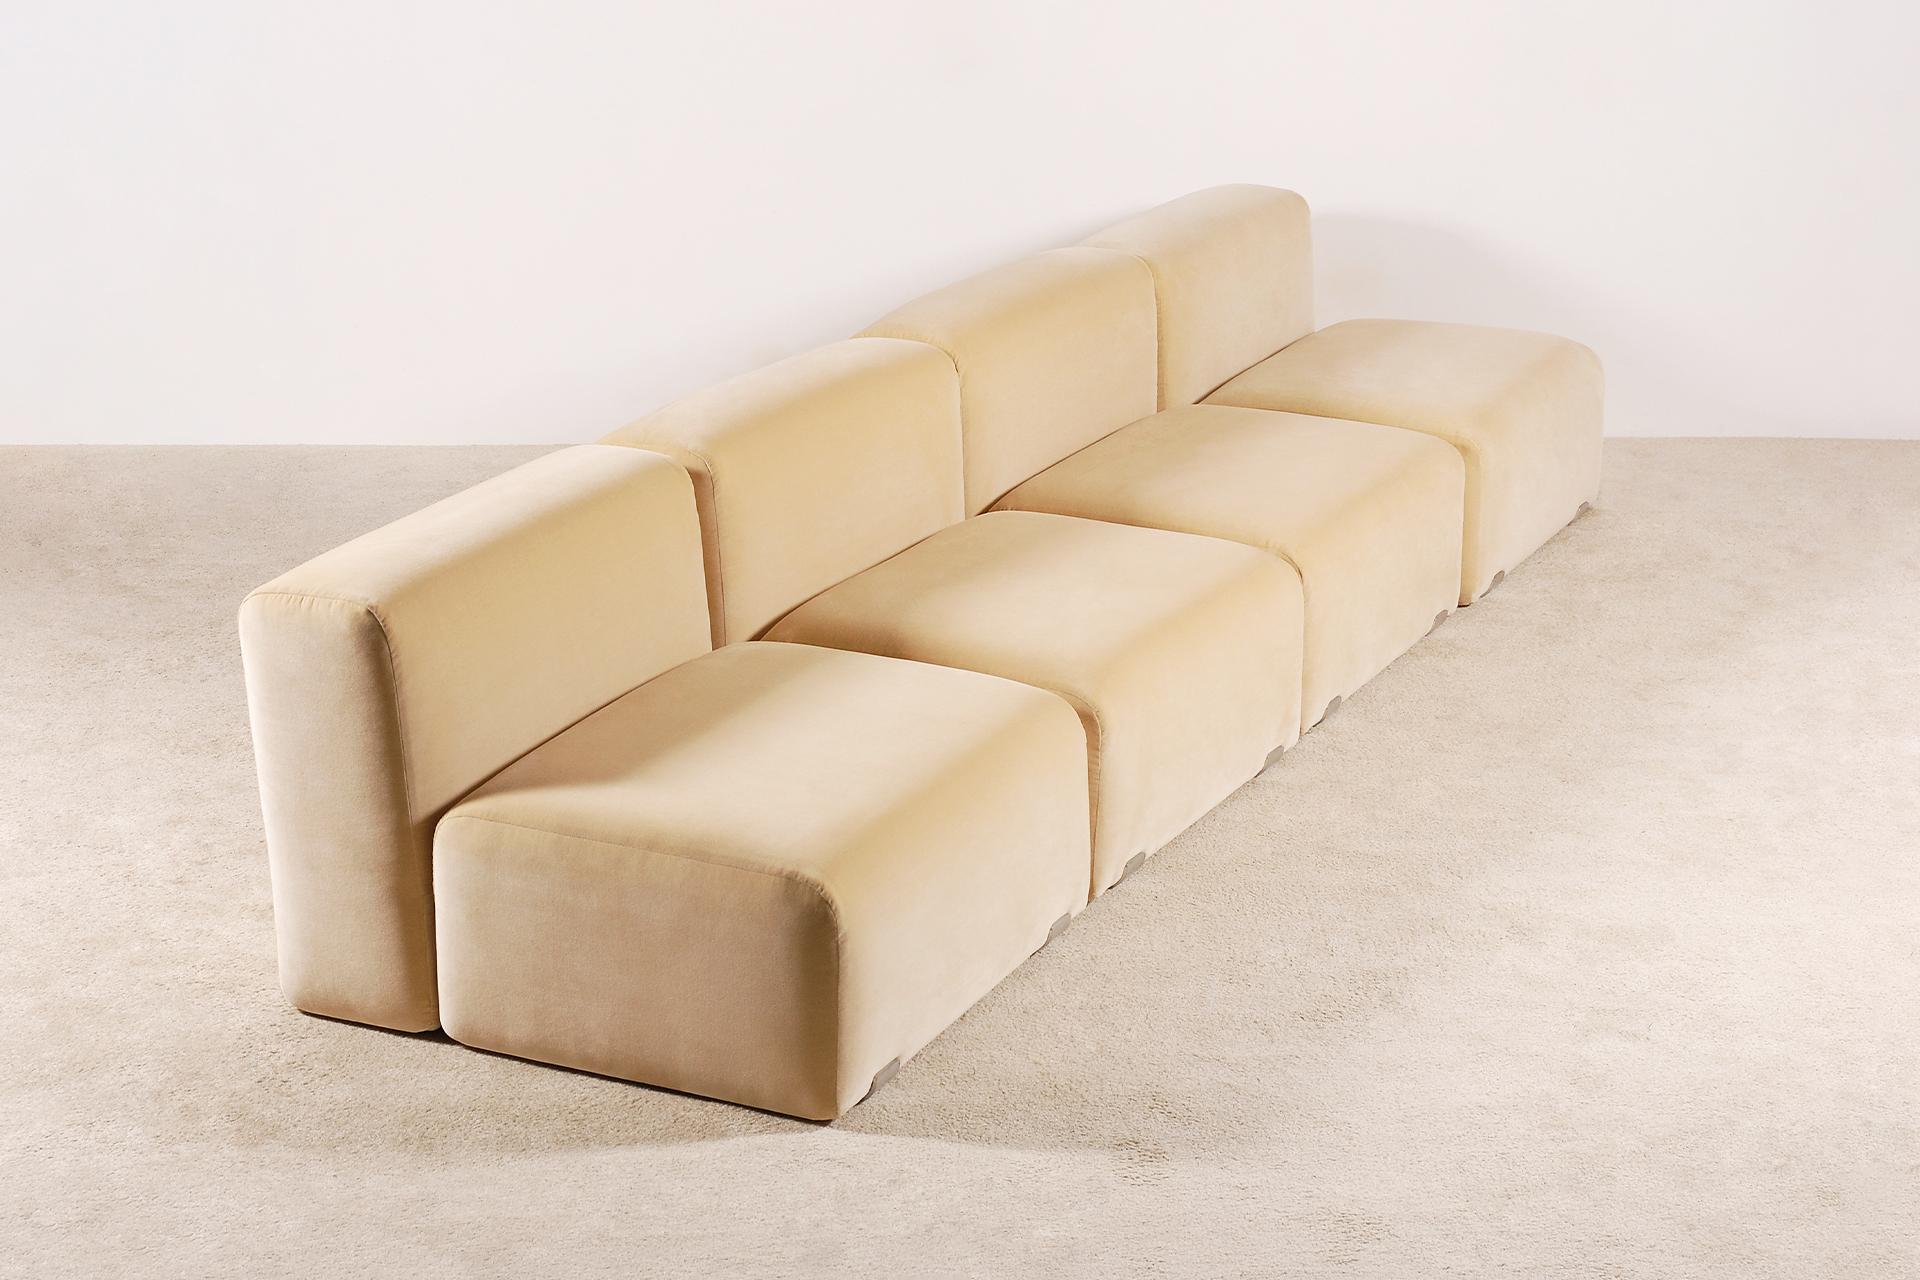 The Marcel collection, a seating modular system developed in 1965, was a tribute by Dino Gavina to Marcel Duchamp. Sofas, armchairs and pouf designed by the architect Kazuhide Takahama, are the result of an artistic collaboration with